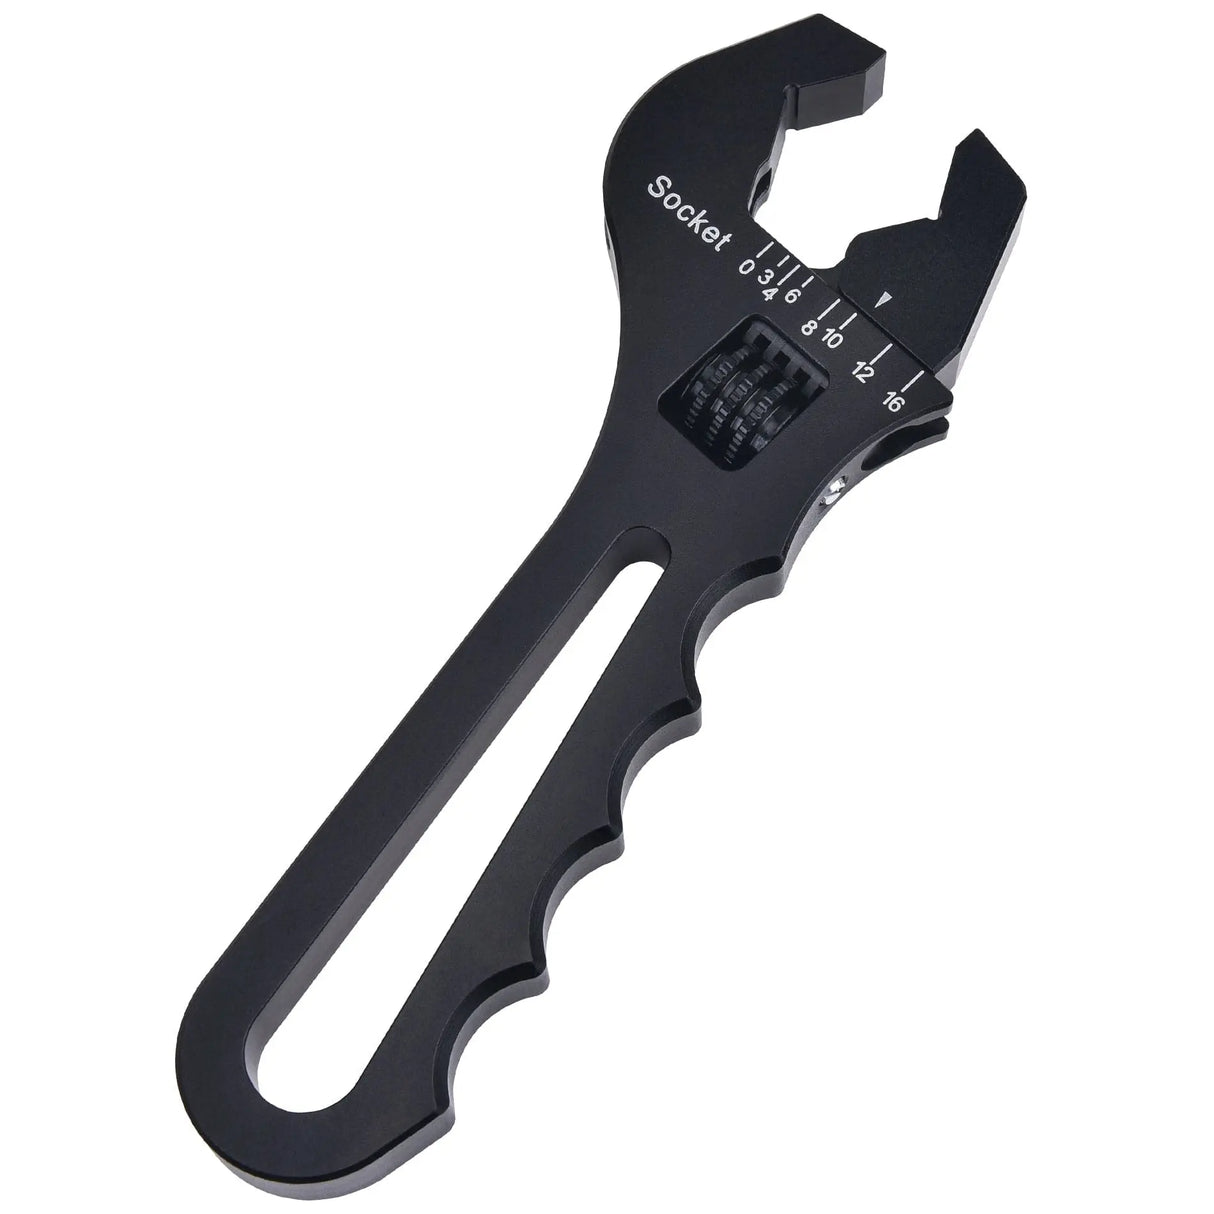 EVIL ENERGY Adjustable AN Hose Fitting Wrench - AN3 to AN16